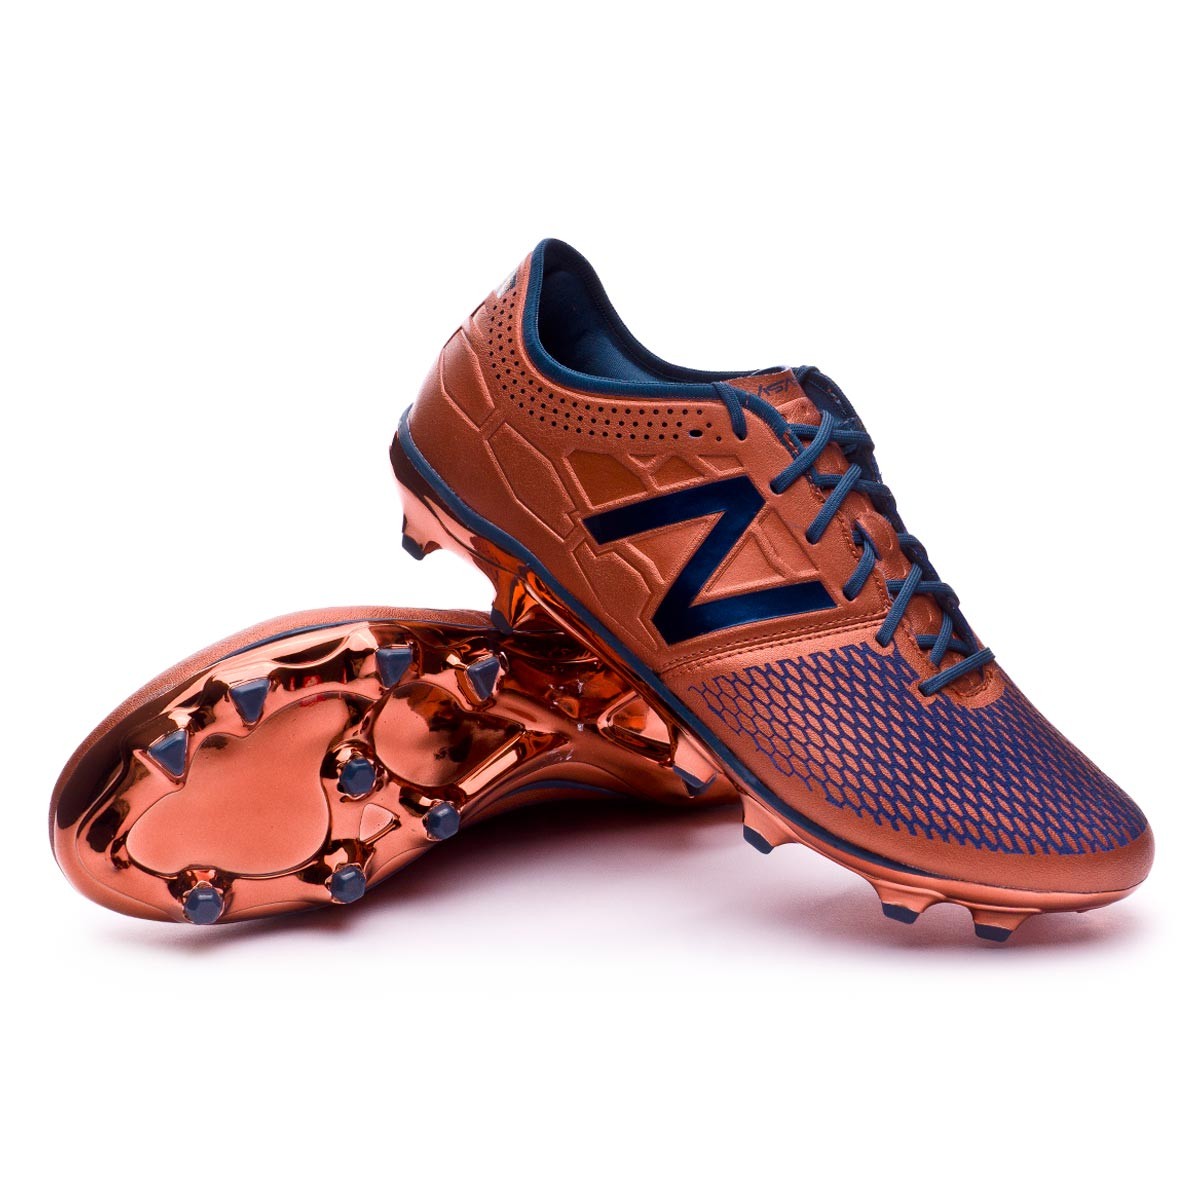 new balance limited edition football boots